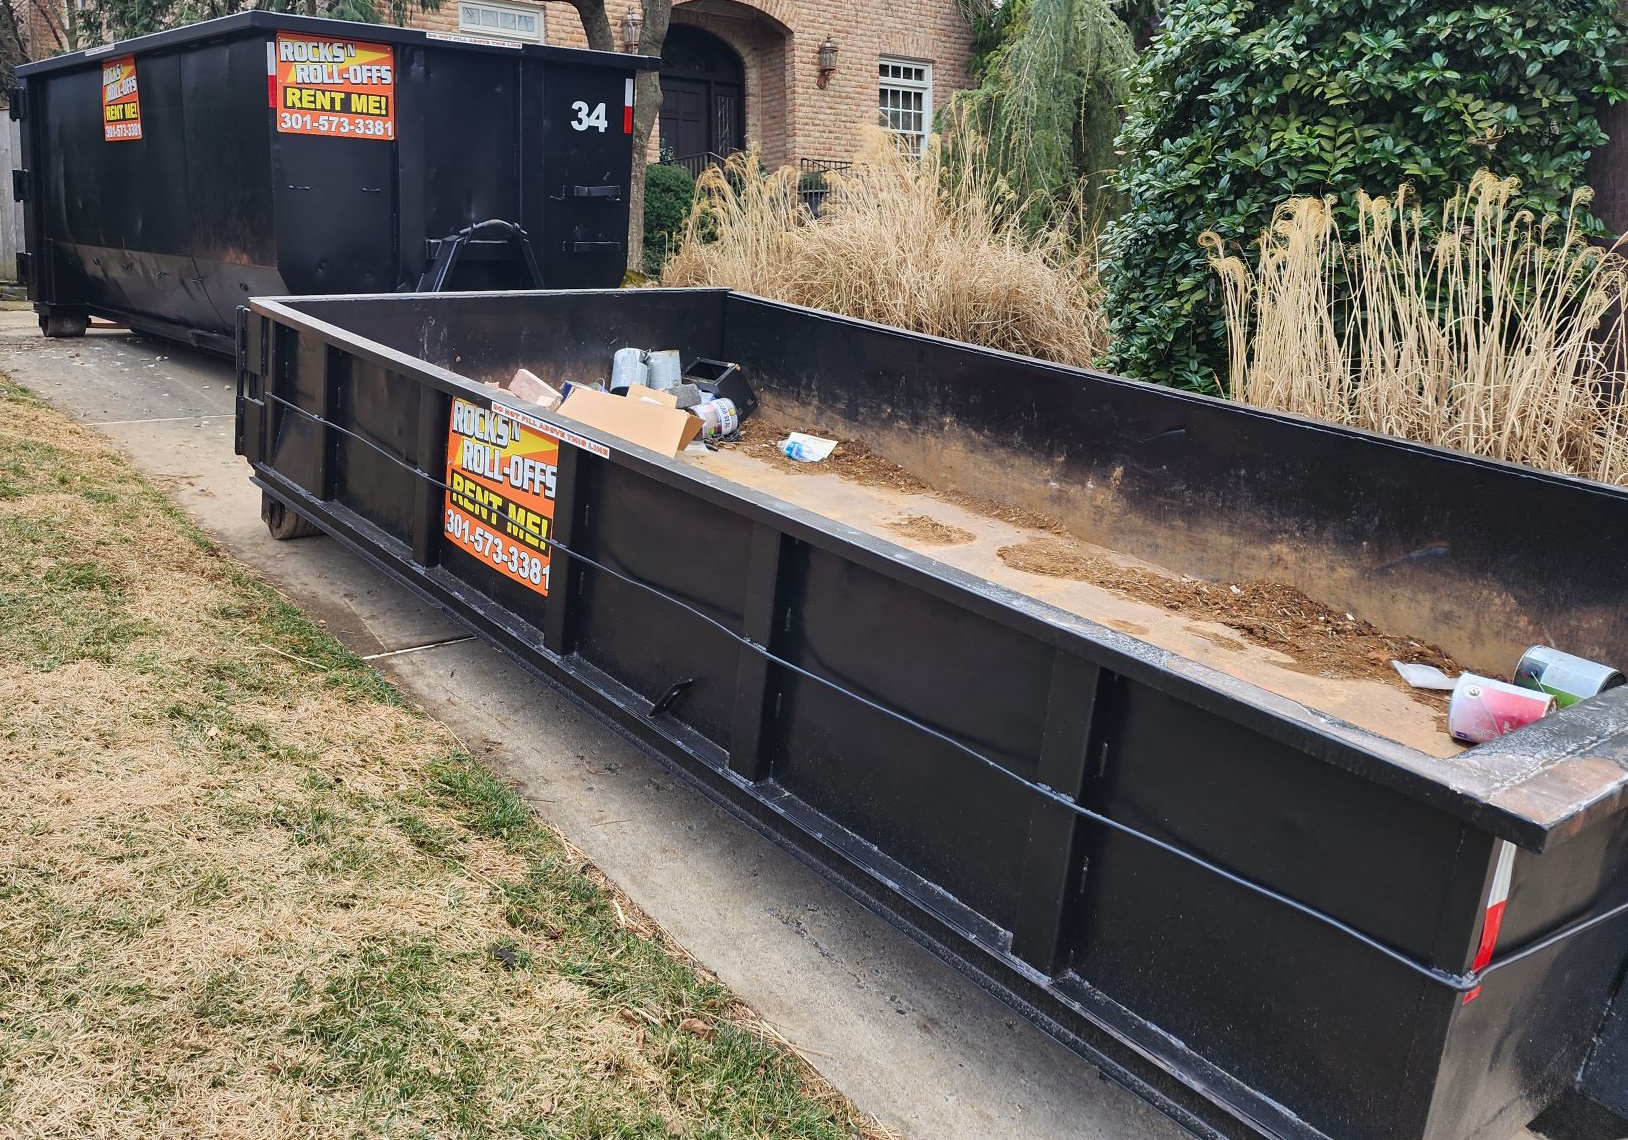 Rocks and Roll-Offs – Roll-off dumpster service